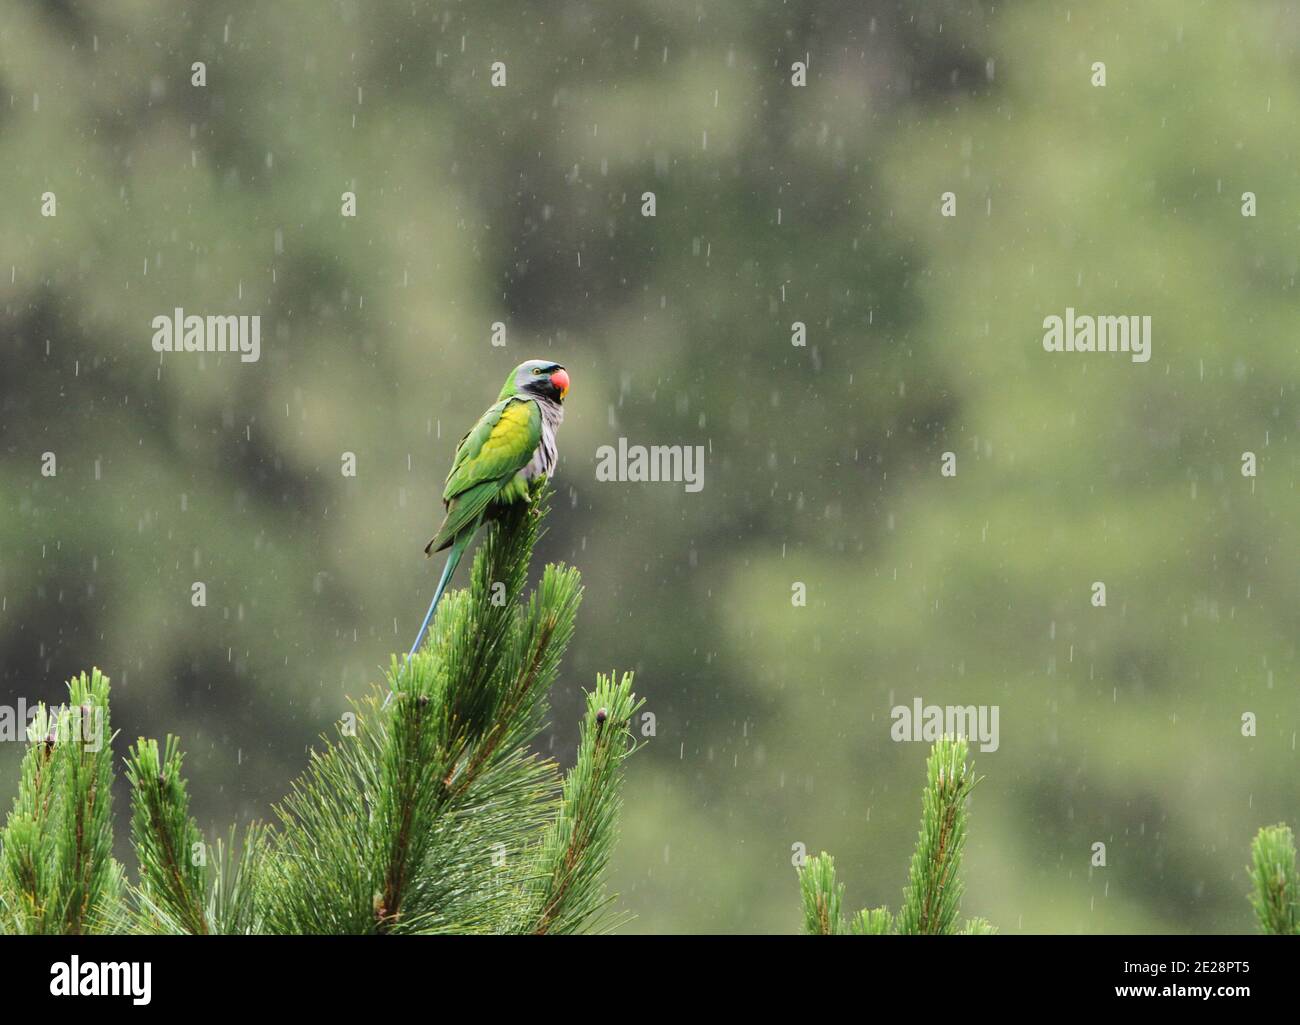 Lord Derby's parakeet, Derbyan parakeet (Psittacula derbiana), perching on mountain pine during heavy rain, China, Lulang Forest Stock Photo